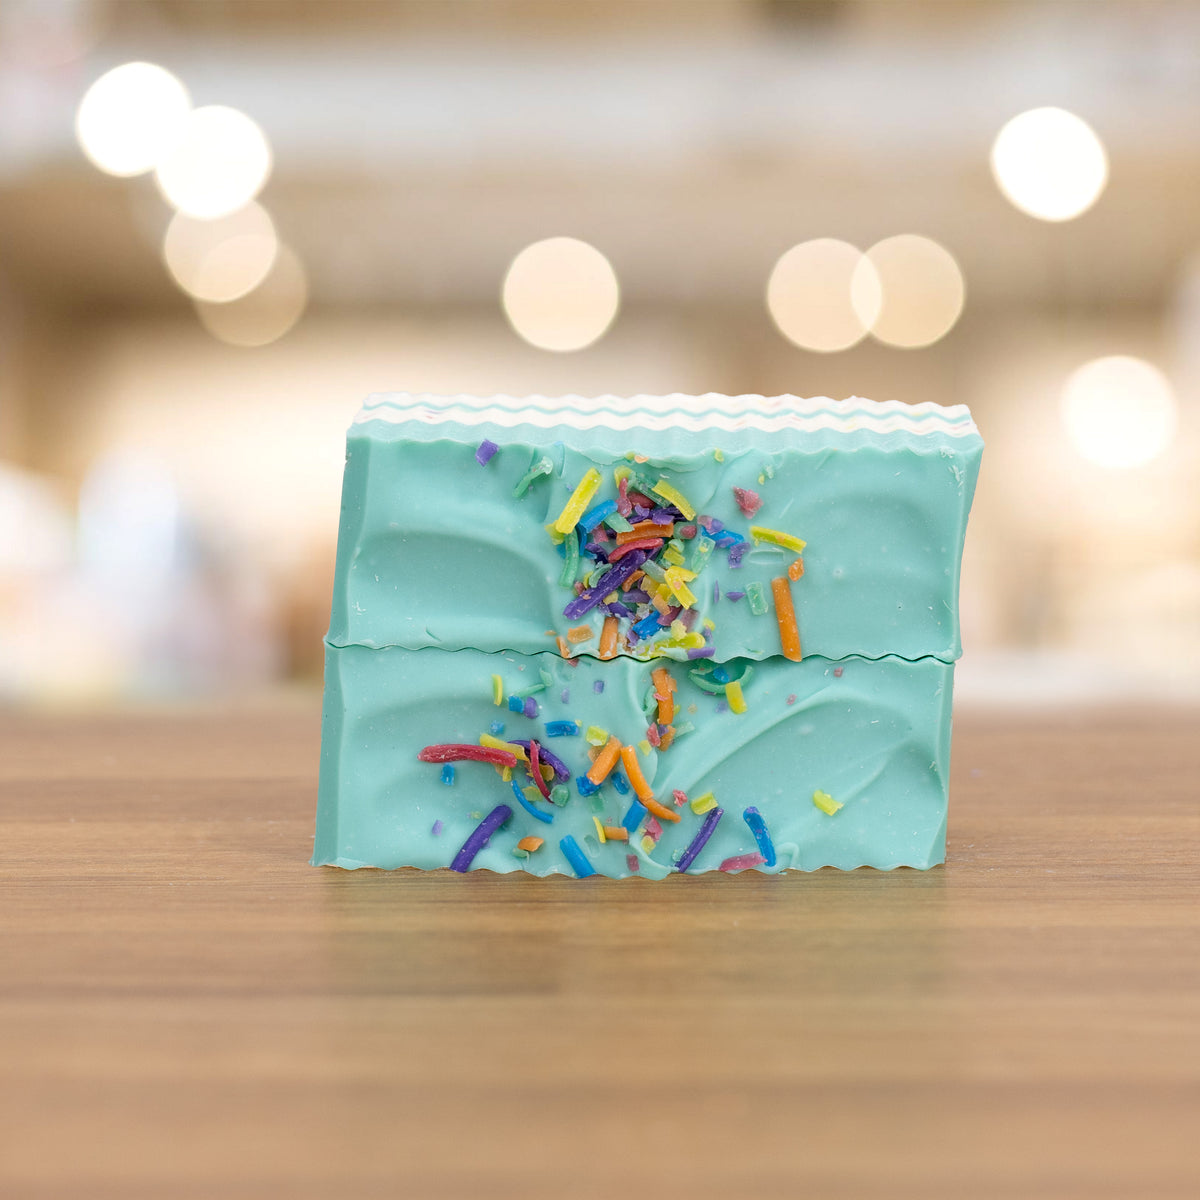 Life of the Party Soap